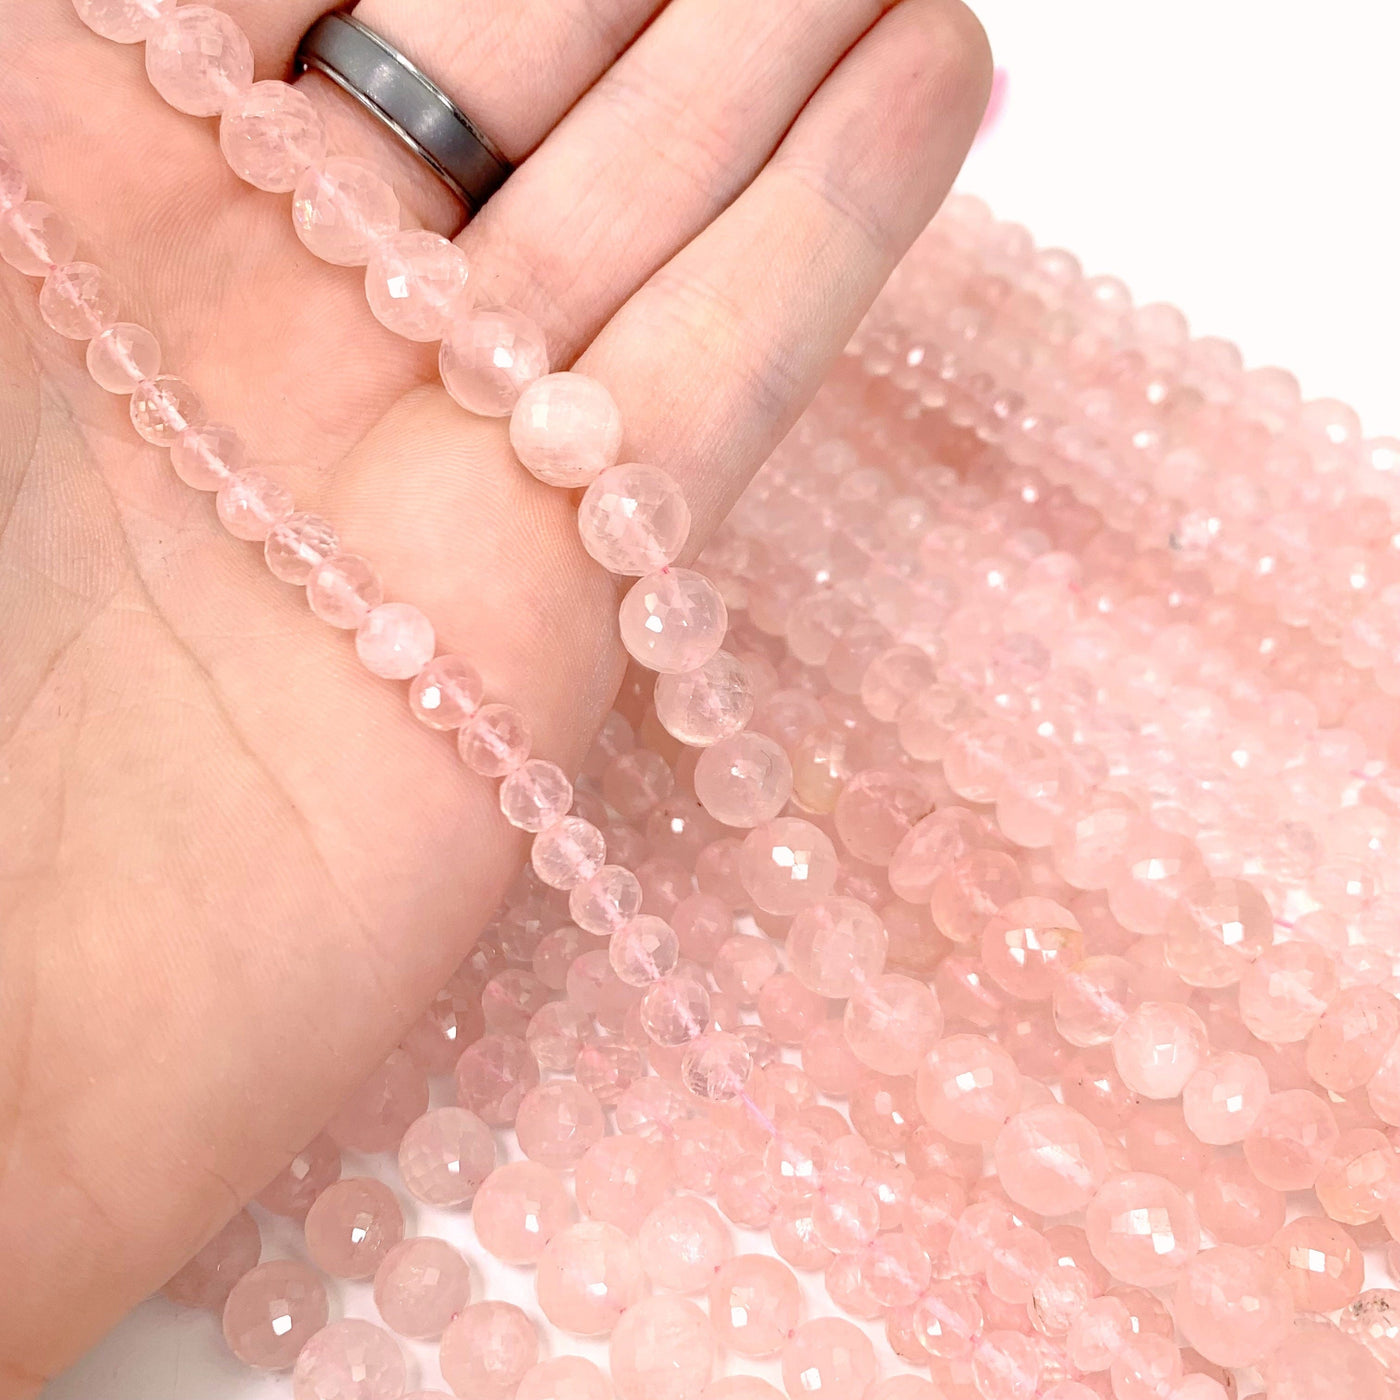 both variations of rose quartz (left small, Right large) strands in hand with more rose quartz beads in background with a white background